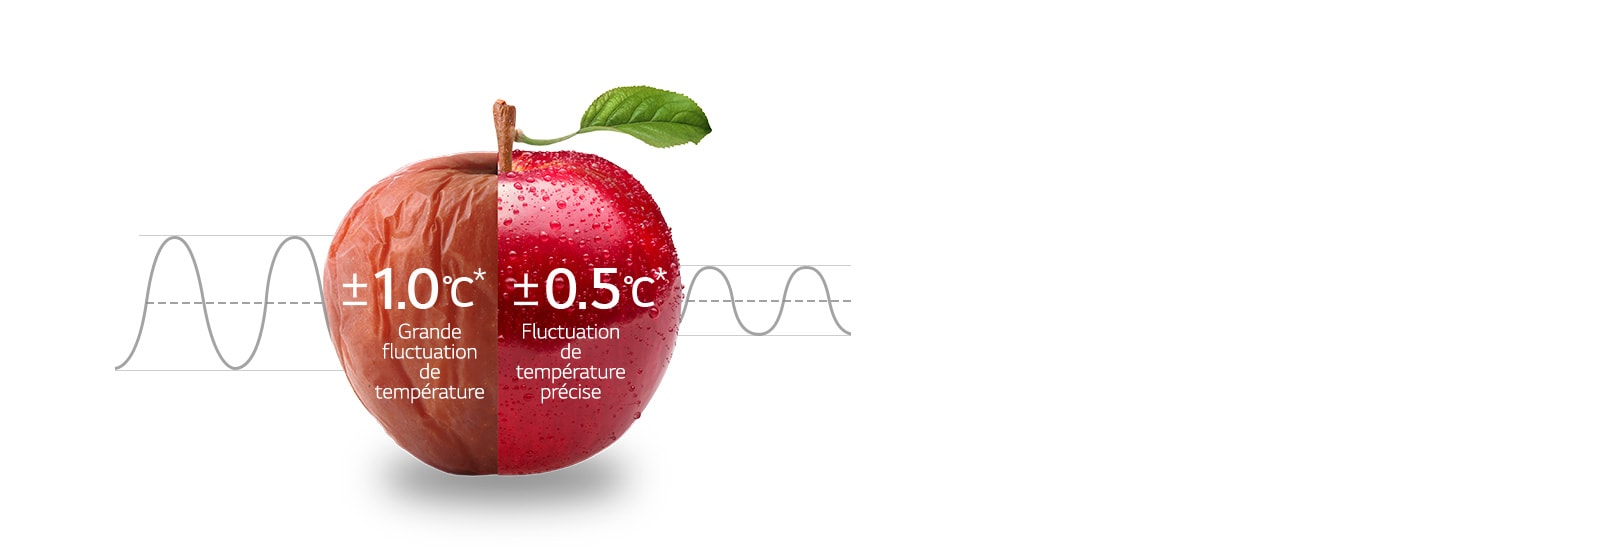 Effect of uniform cold on the durability of an apple